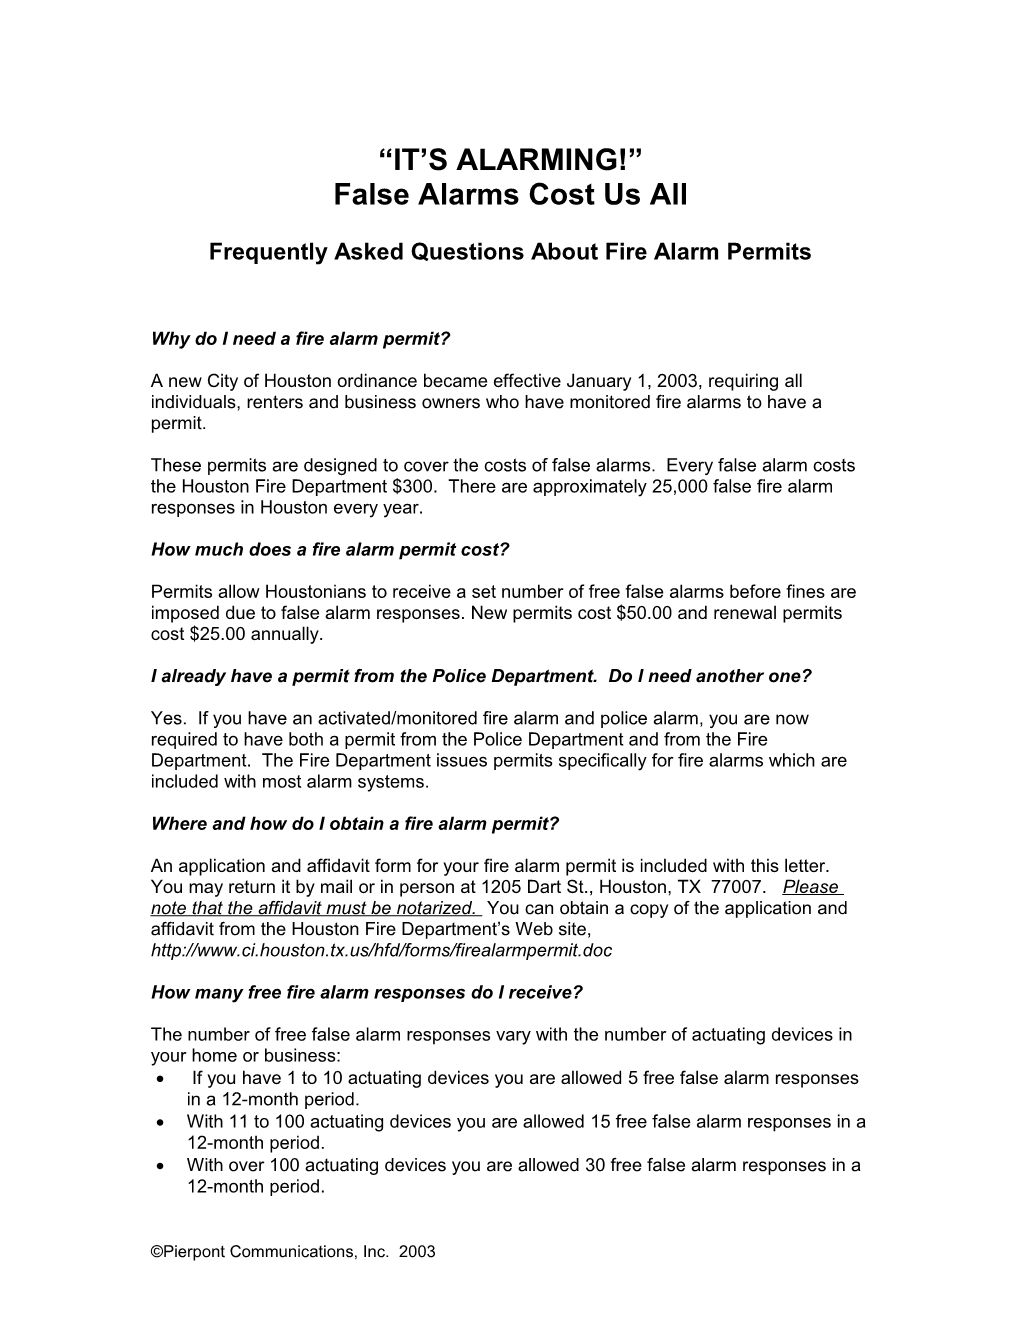 Frequently Asked Questions About Fire Alarm Permits